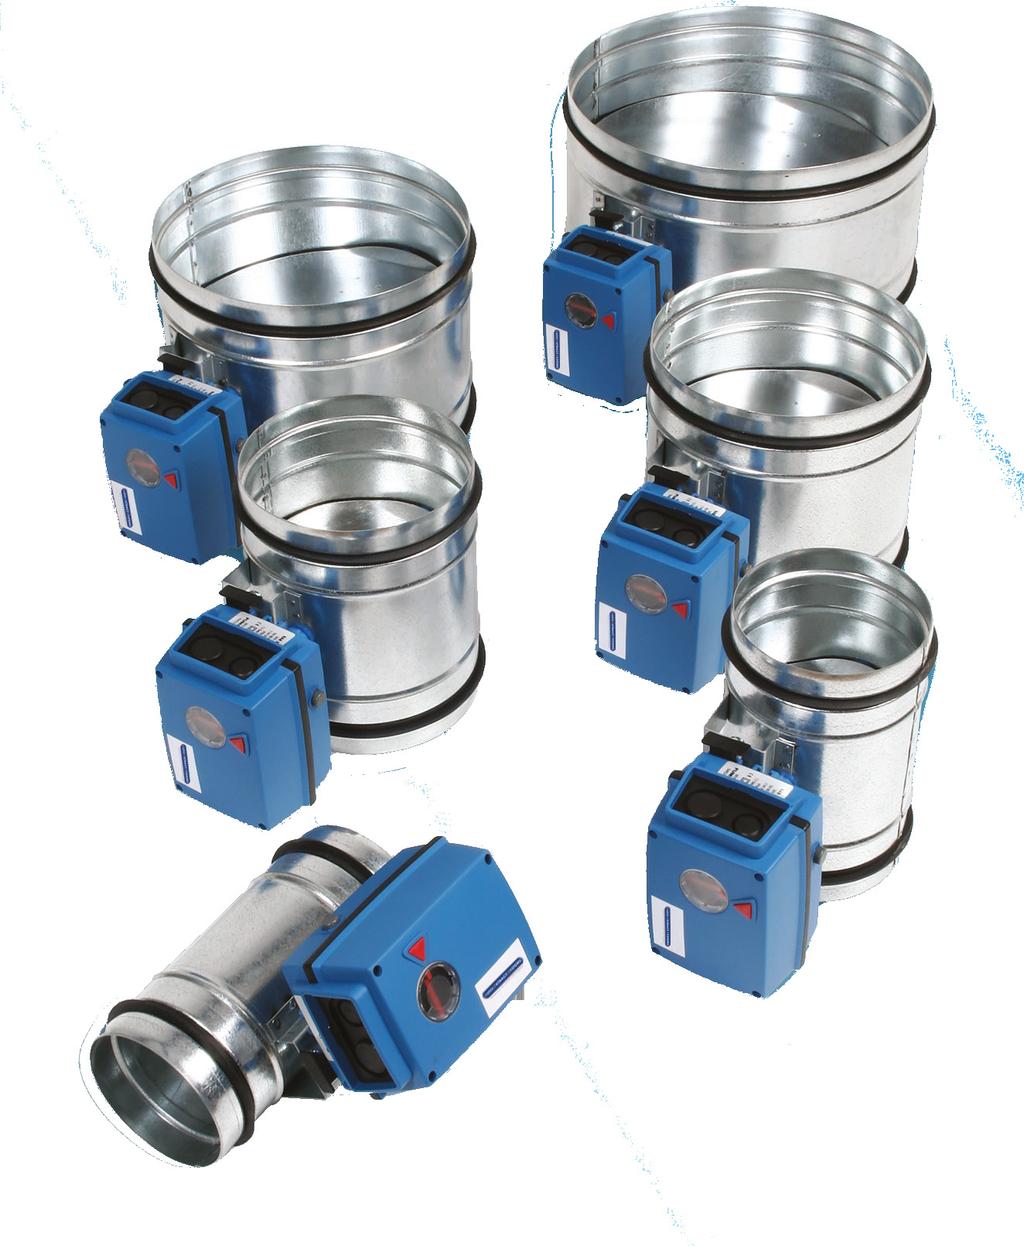 A ~ 24 V A AUTOMATIC DAMPER The A is an automatic single-leaf damper for applications where short operating